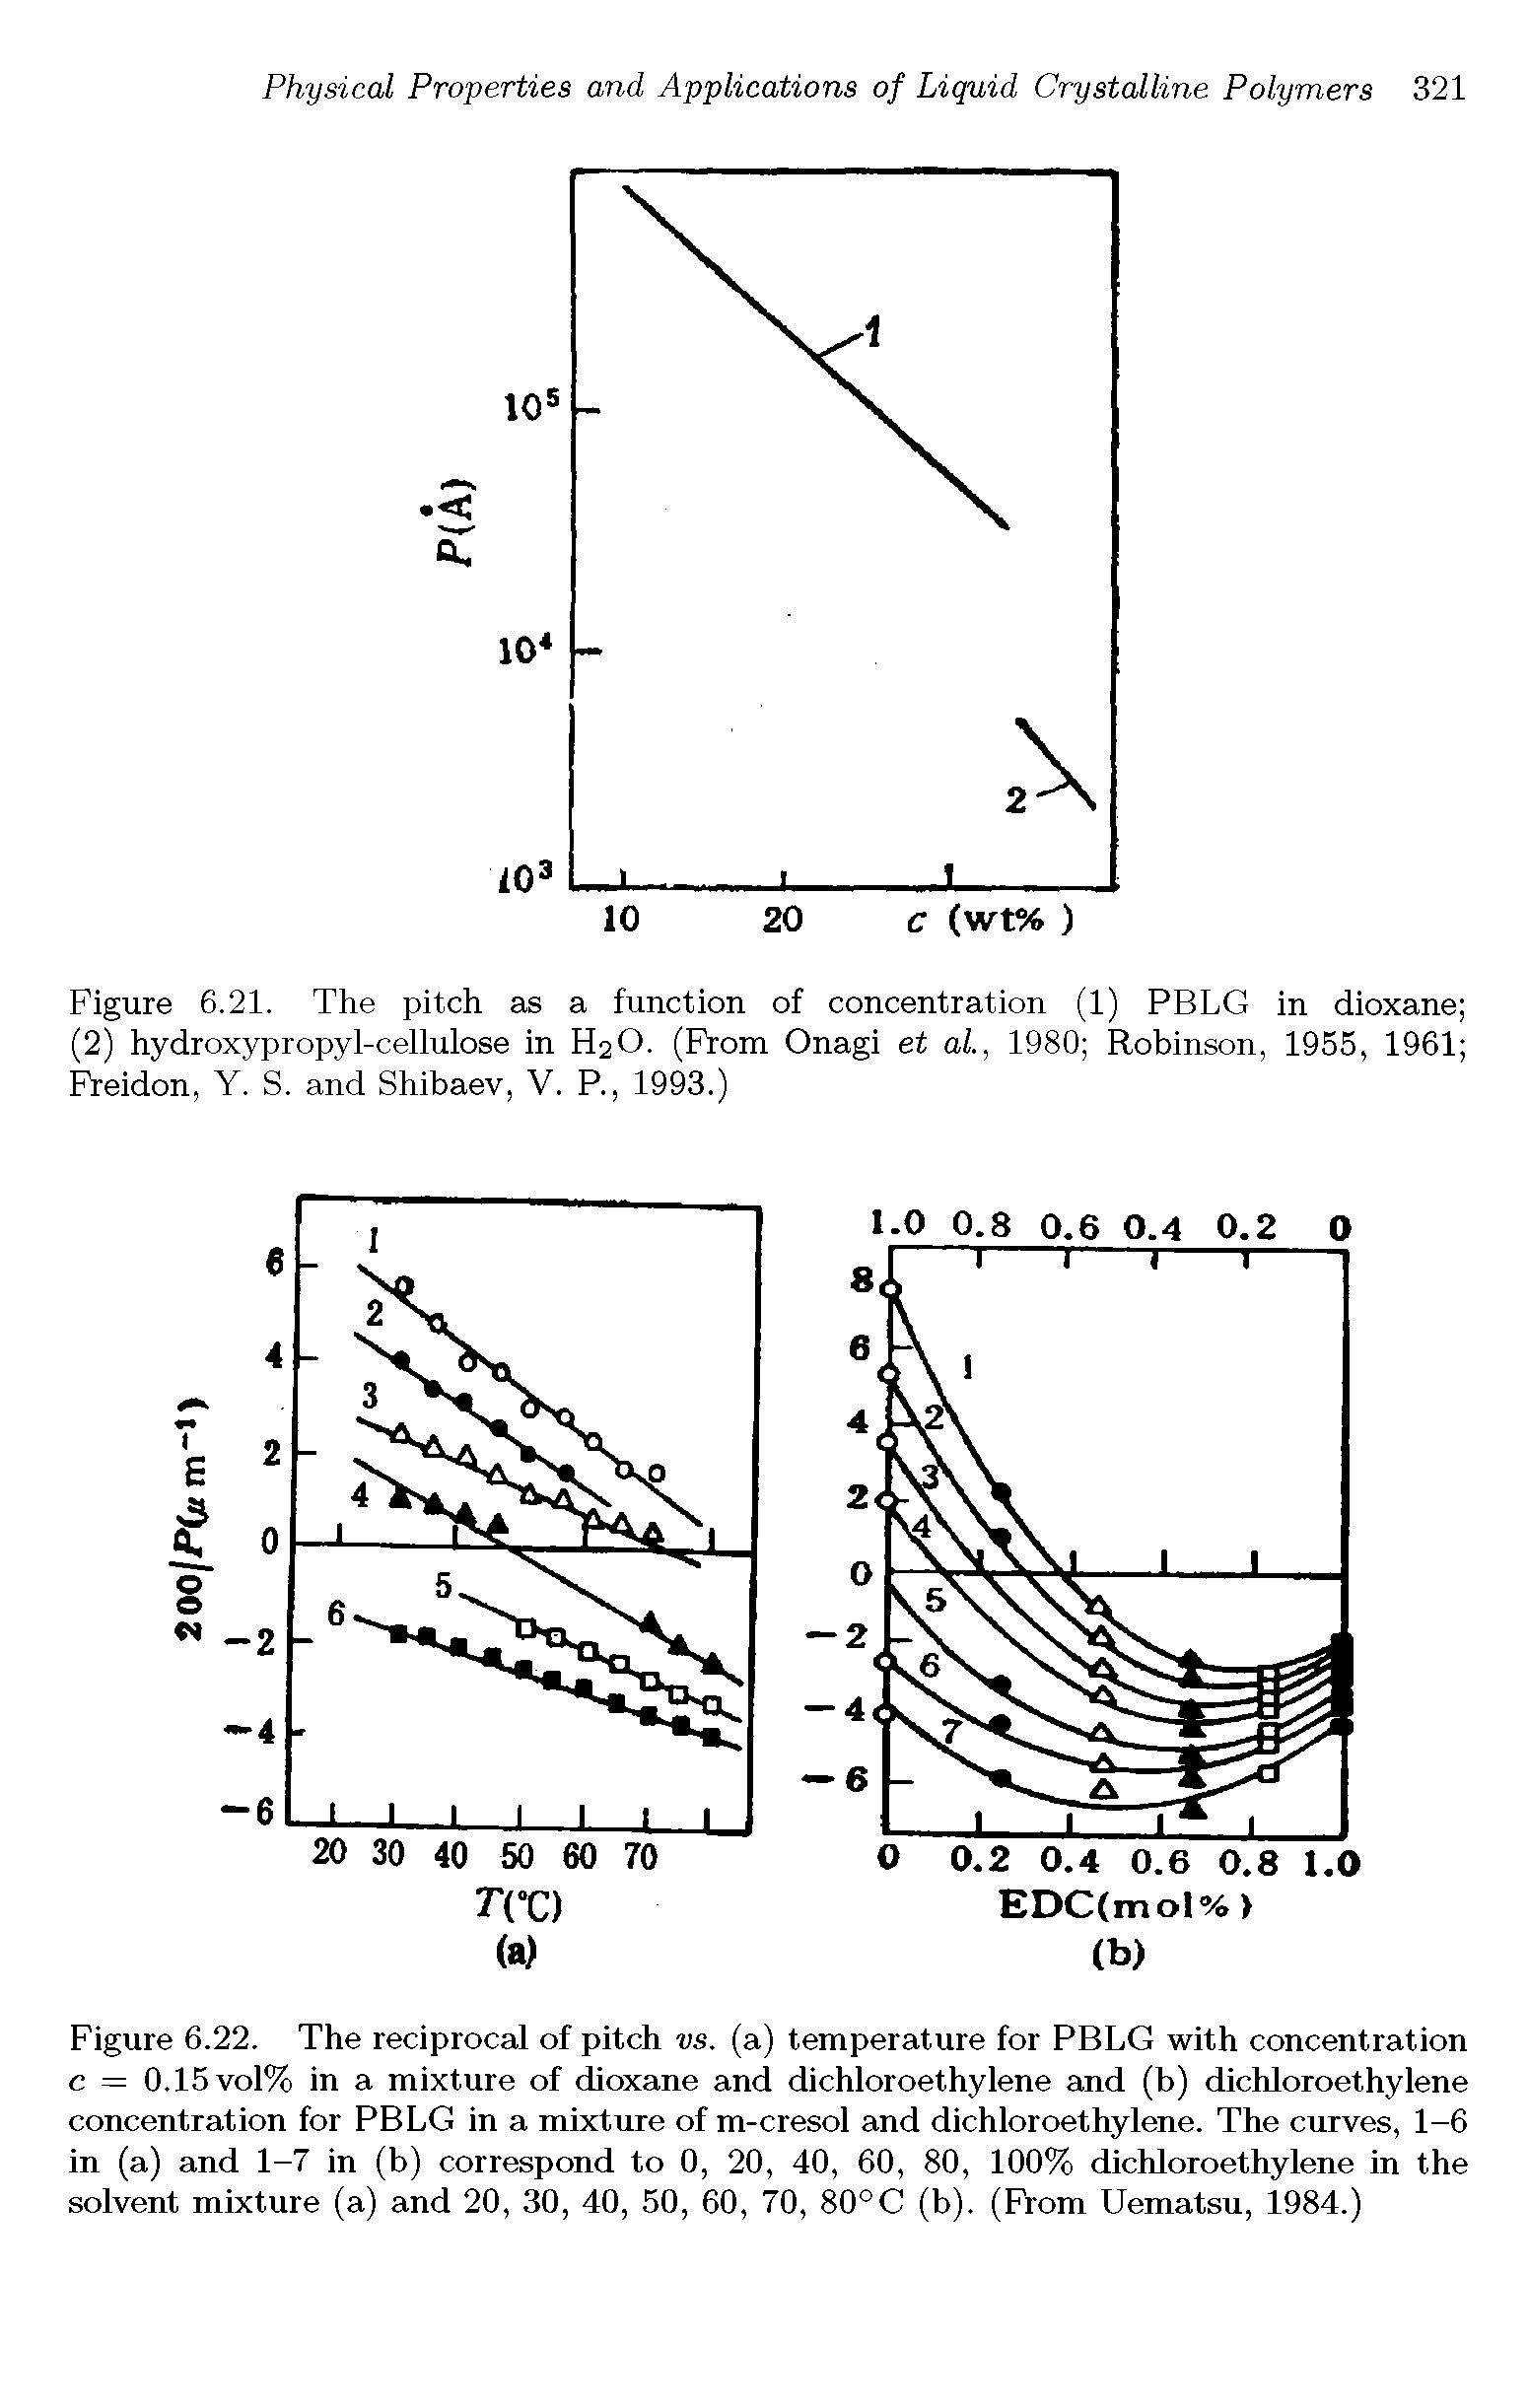 Figure 6.22. The reciprocal of pitch vs. (a) temperature for PBLG with concentration c = 0.15 vol% in a mixture of dioxane and dichloroethylene and (b) dichloroethylene concentration for PBLG in a mixture of m-cresol and dichloroethylene. The curves, 1-6 in (a) and 1-7 in (b) correspond to 0, 20, 40, 60, 80, 100% dichloroethylene in the solvent mixture (a) and 20, 30, 40, 50, 60, 70, 80°C (b). (From Uematsu, 1984.)...